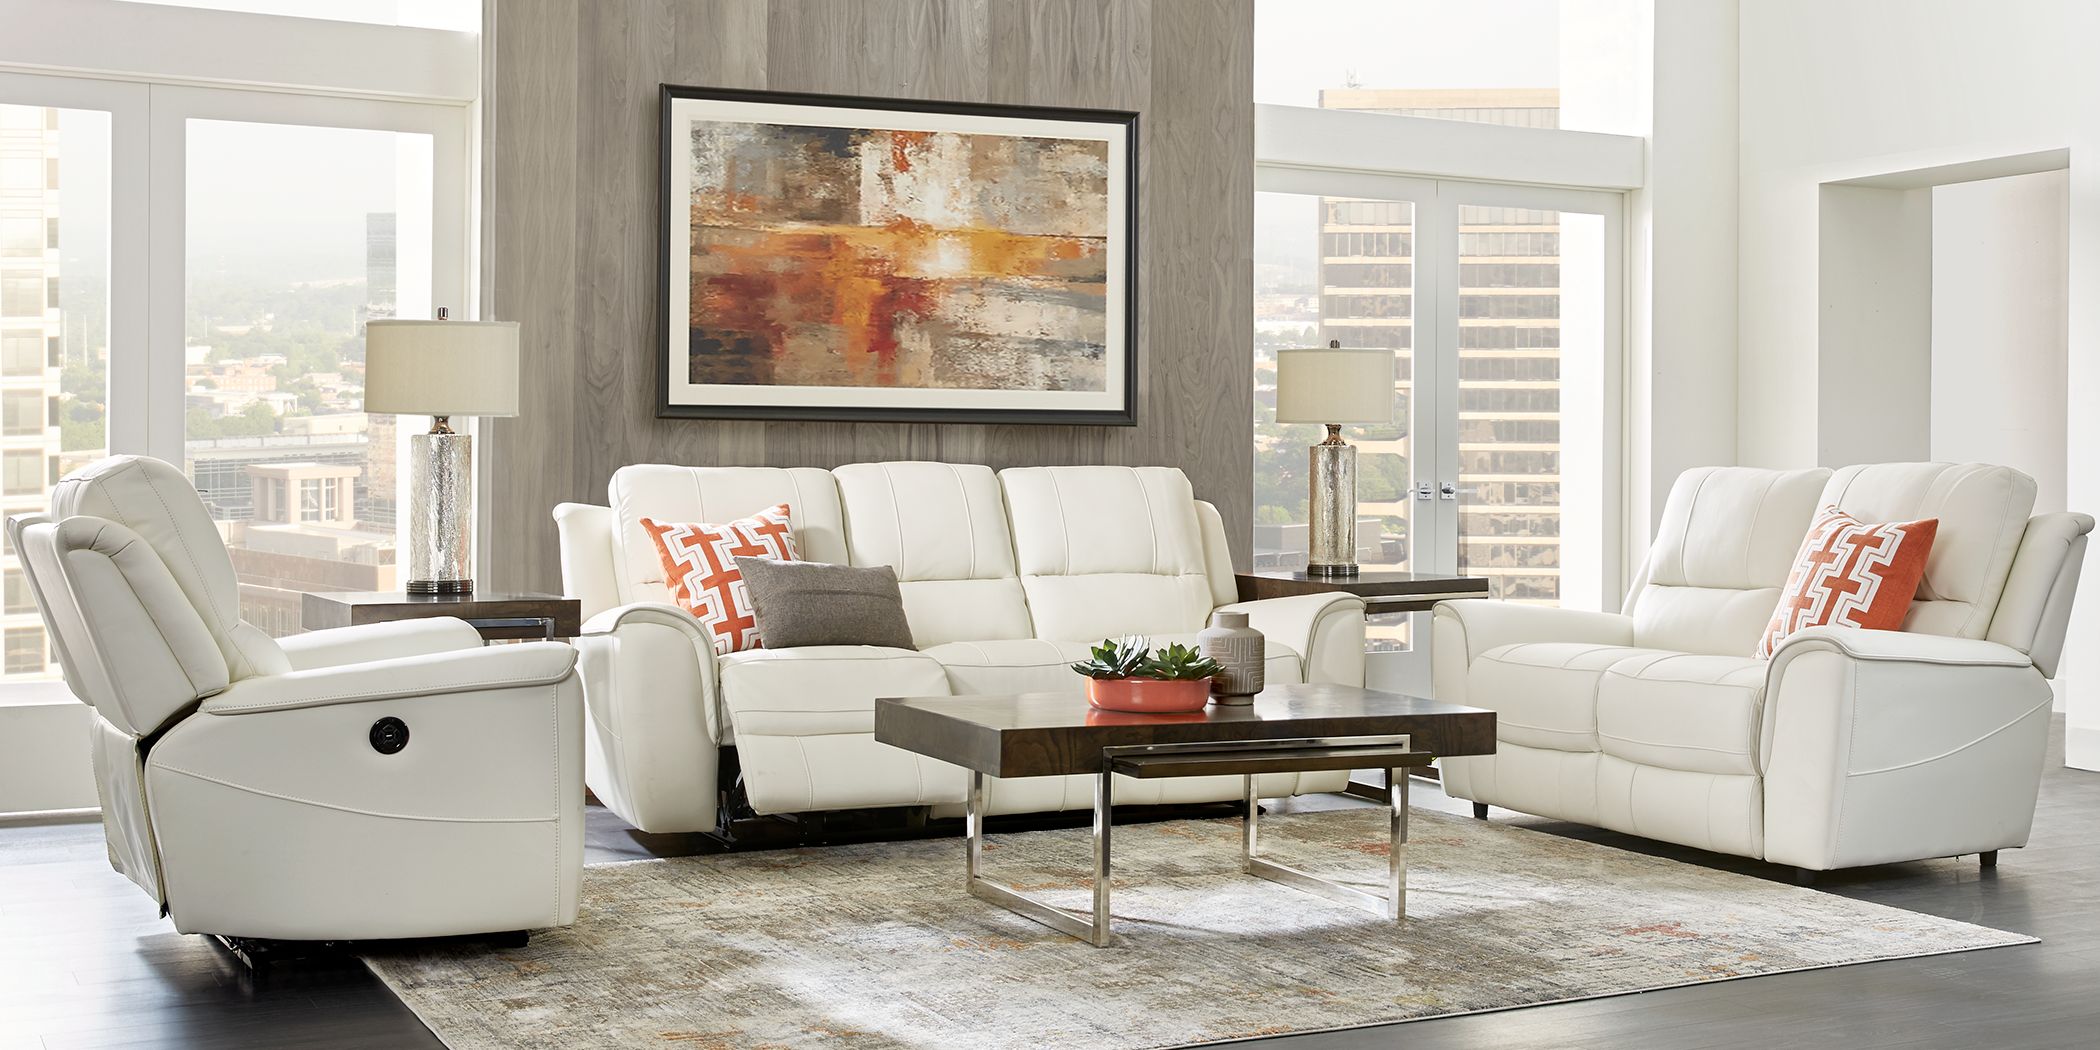 Living Room With Reclining Sofa, Off White Leather Recliners